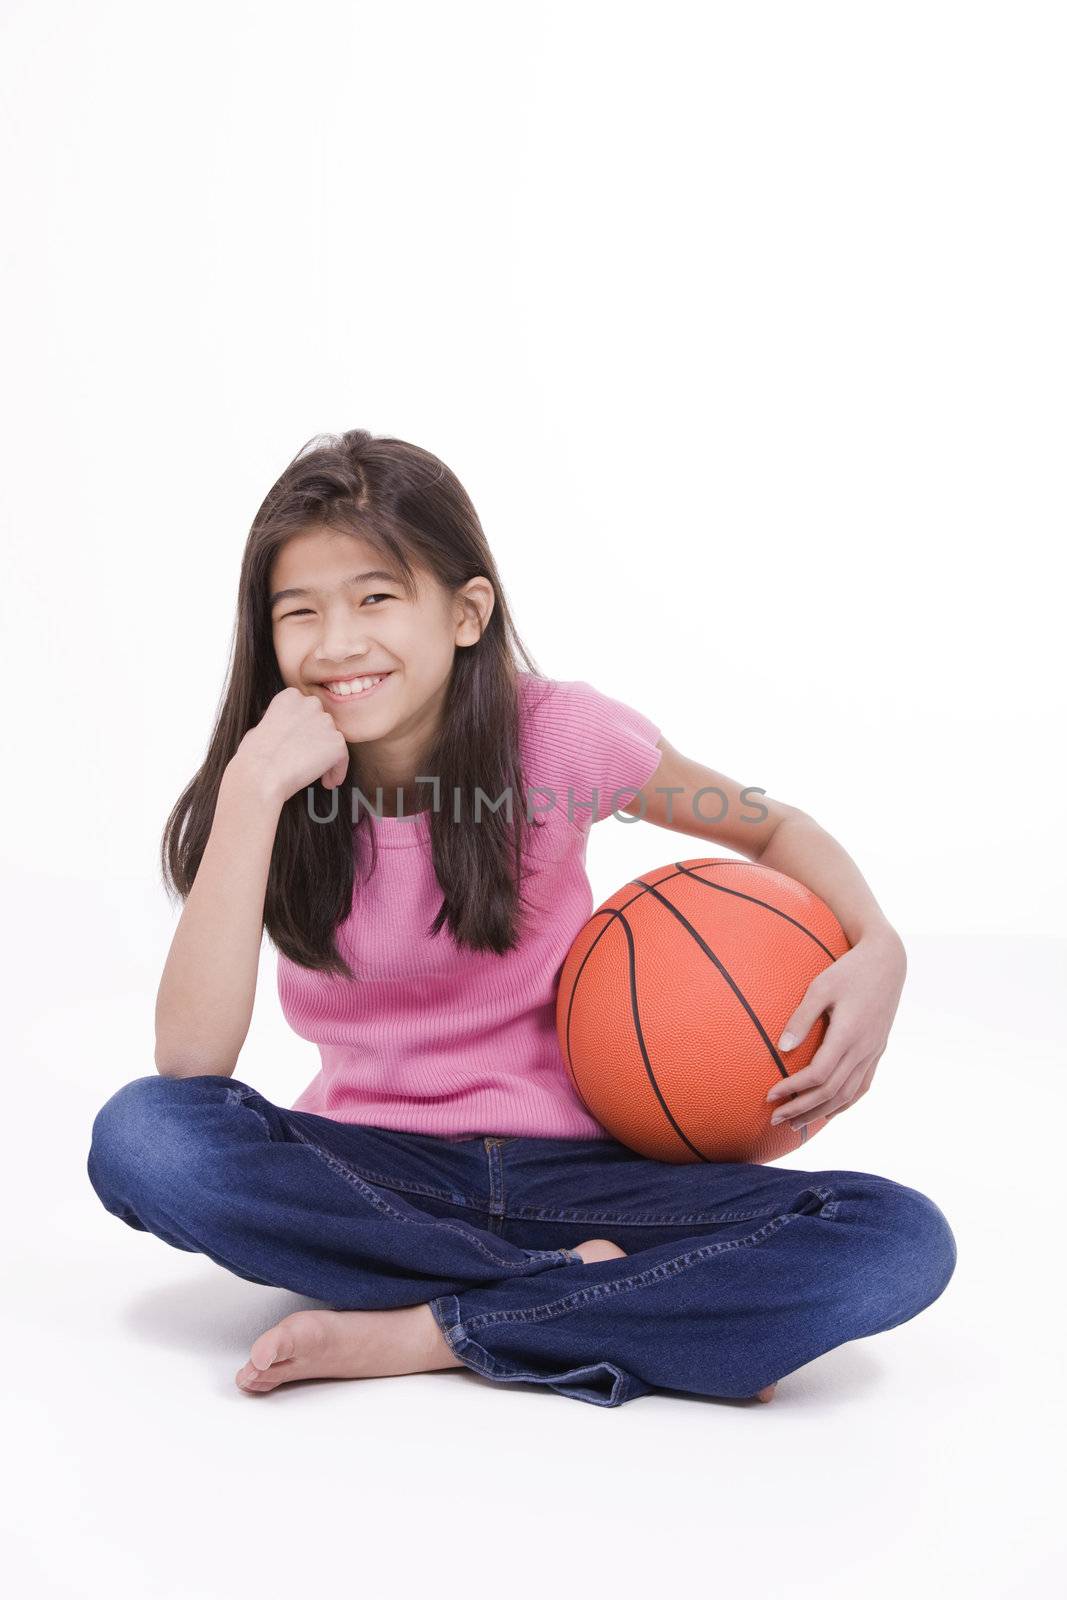 Ten year old Asian girl holding basketball, isolated on white by jarenwicklund